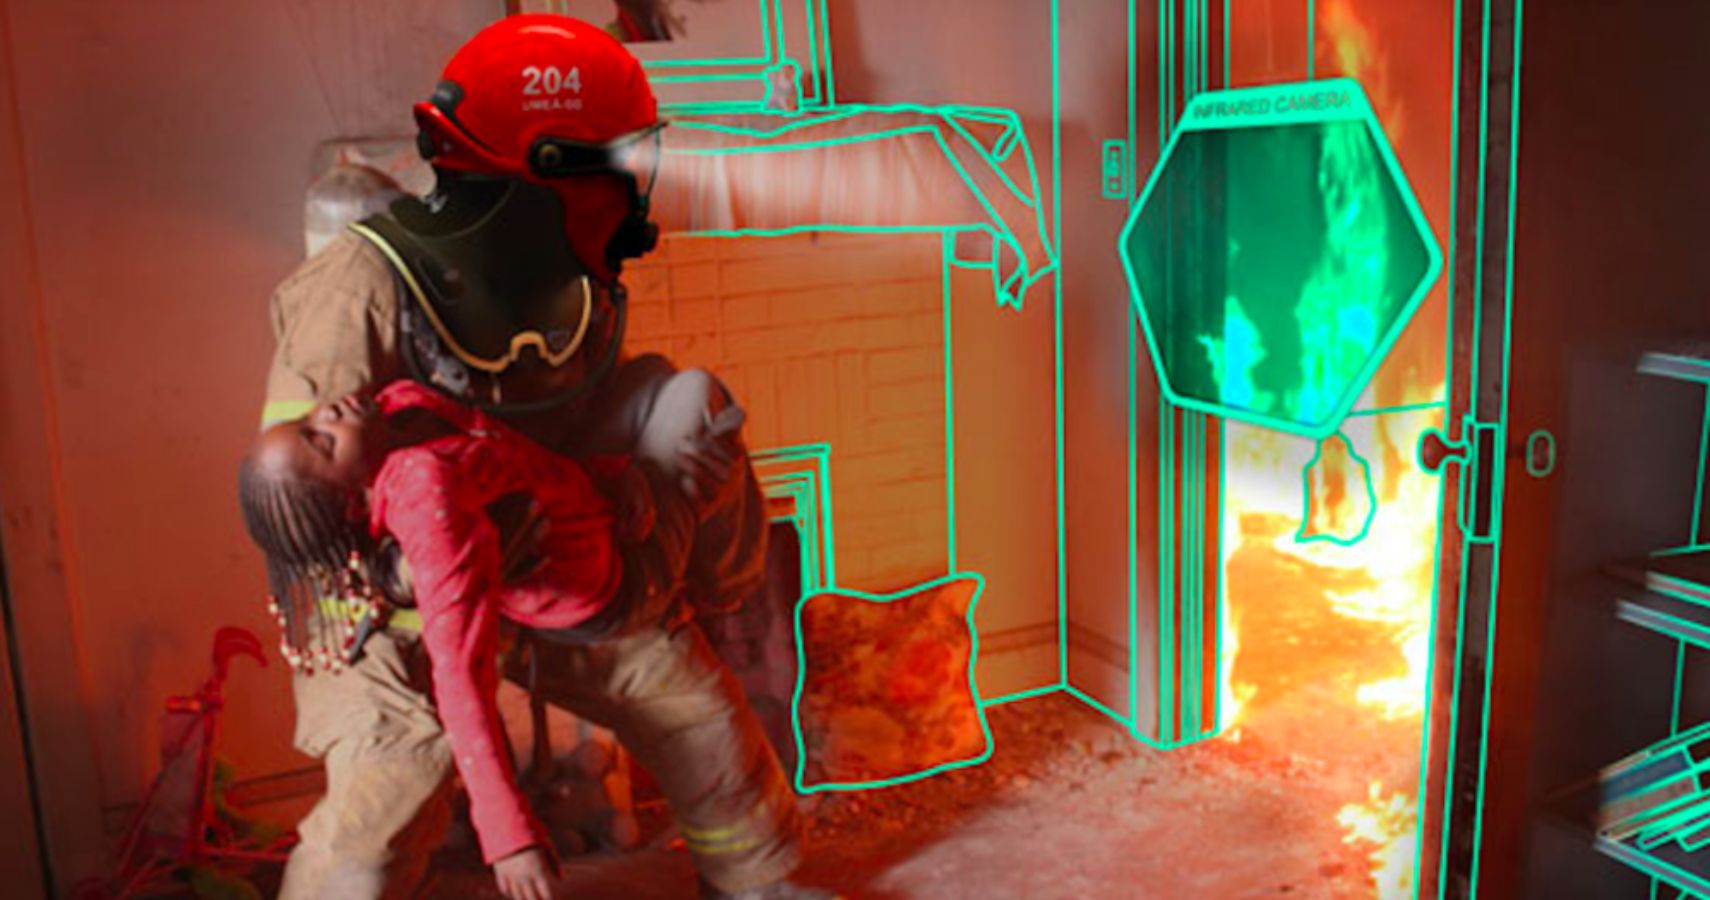 FLAIM Trainer Allows Firefighters To Train Safely Using VR